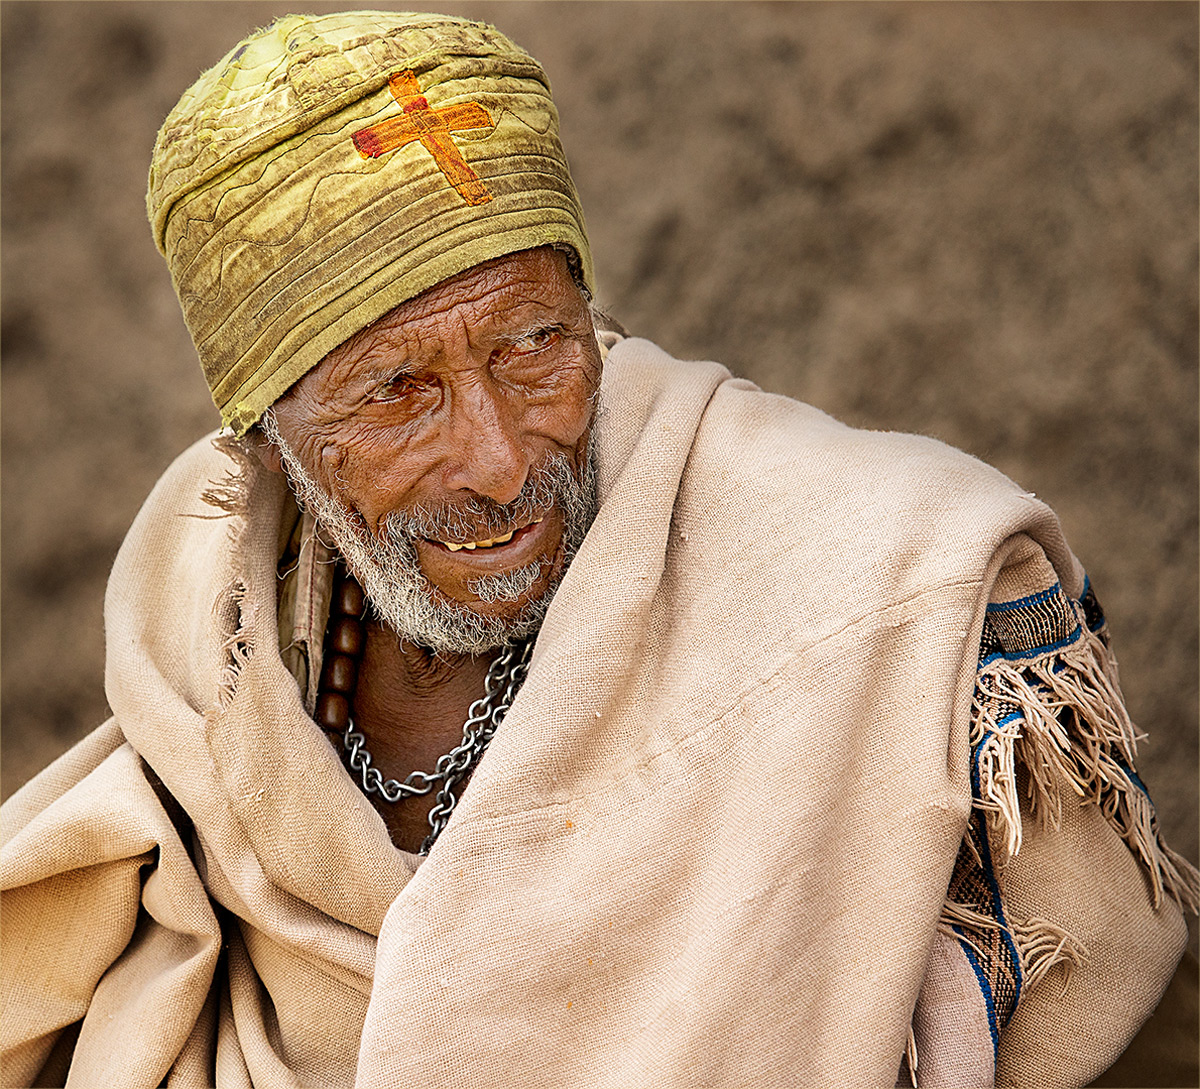 An old man in his church clothes on his way to church, Lalibela, Ethiopia © Hesté de Beer